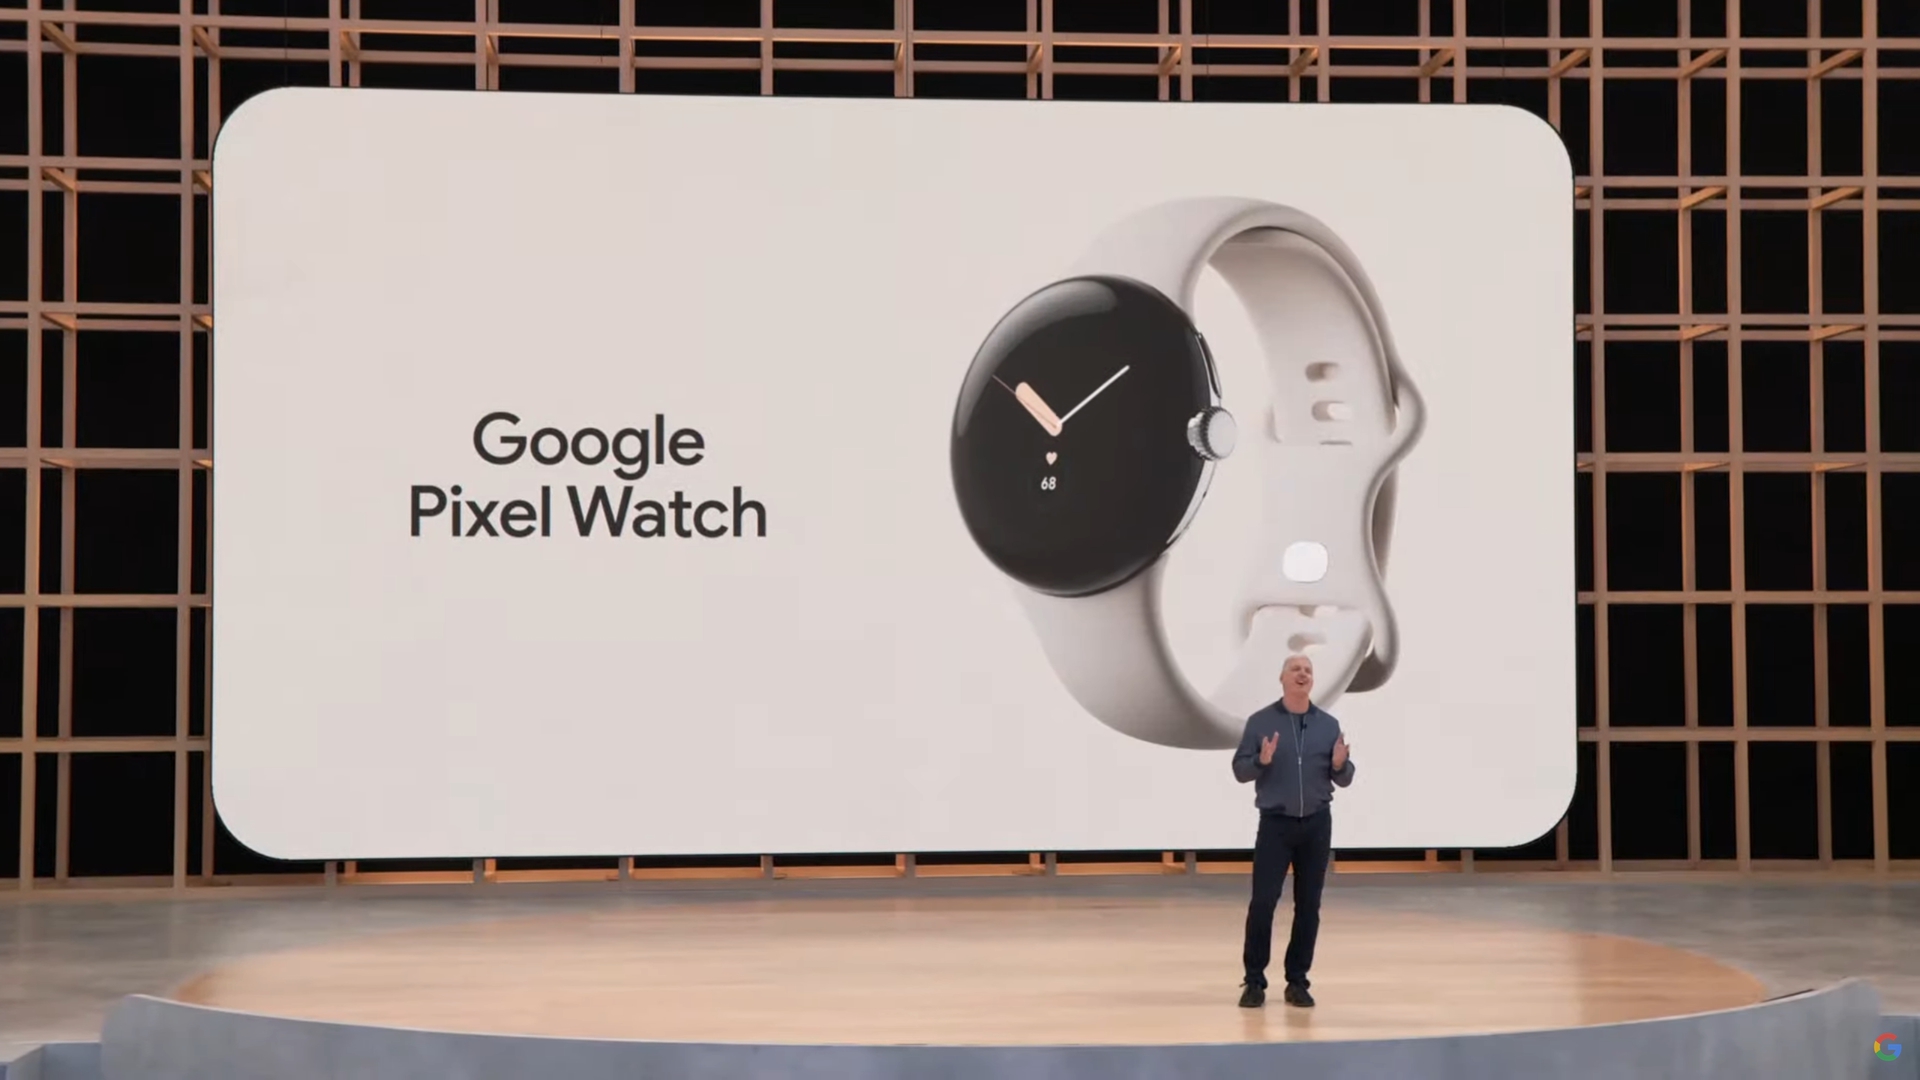 Google Pixel Watch: Everything we know so far (Updated: Oct 4)